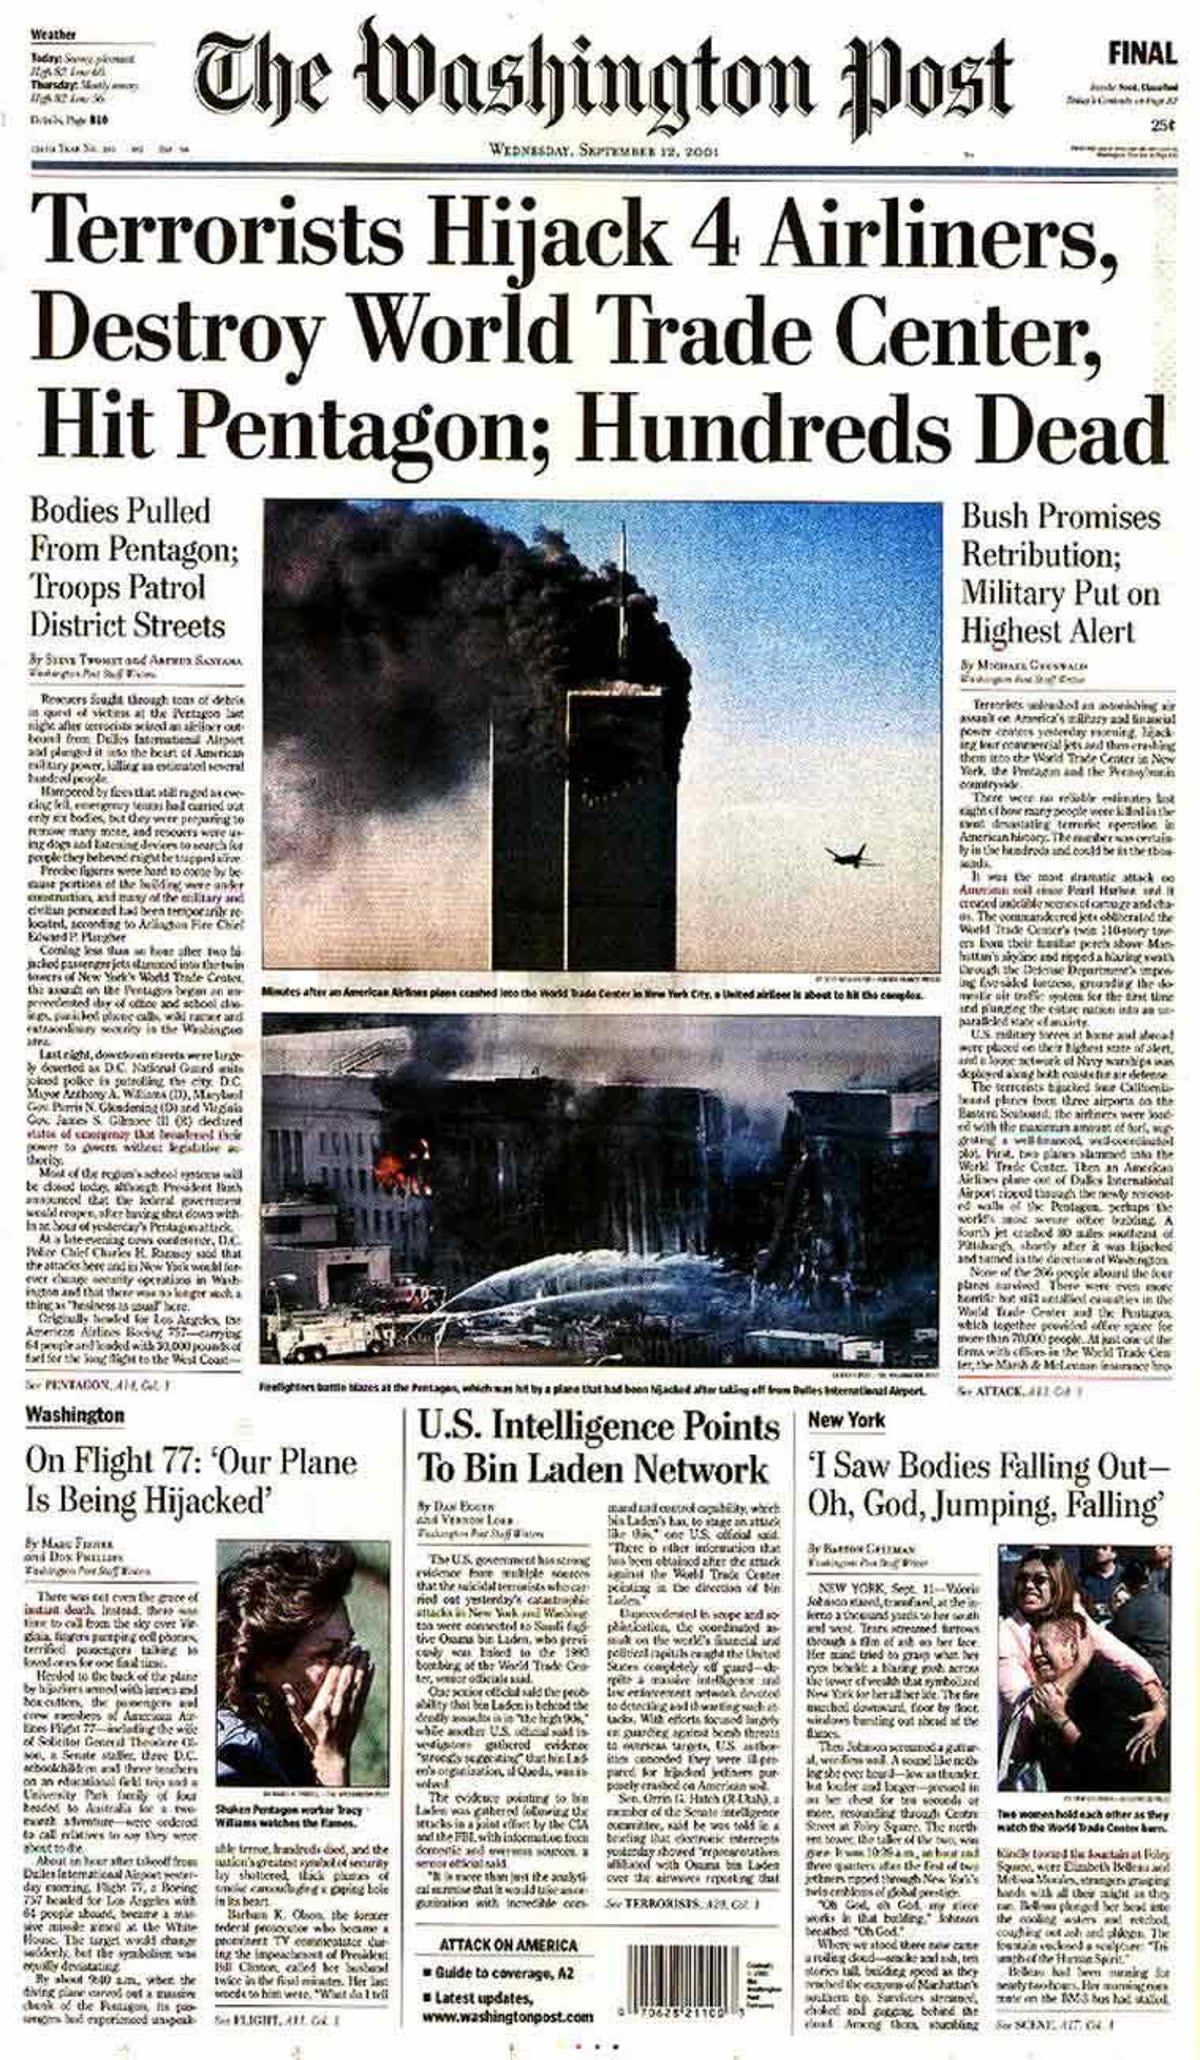 The Washington Post’s front page on 12 September, 2001 (The Washington Post)